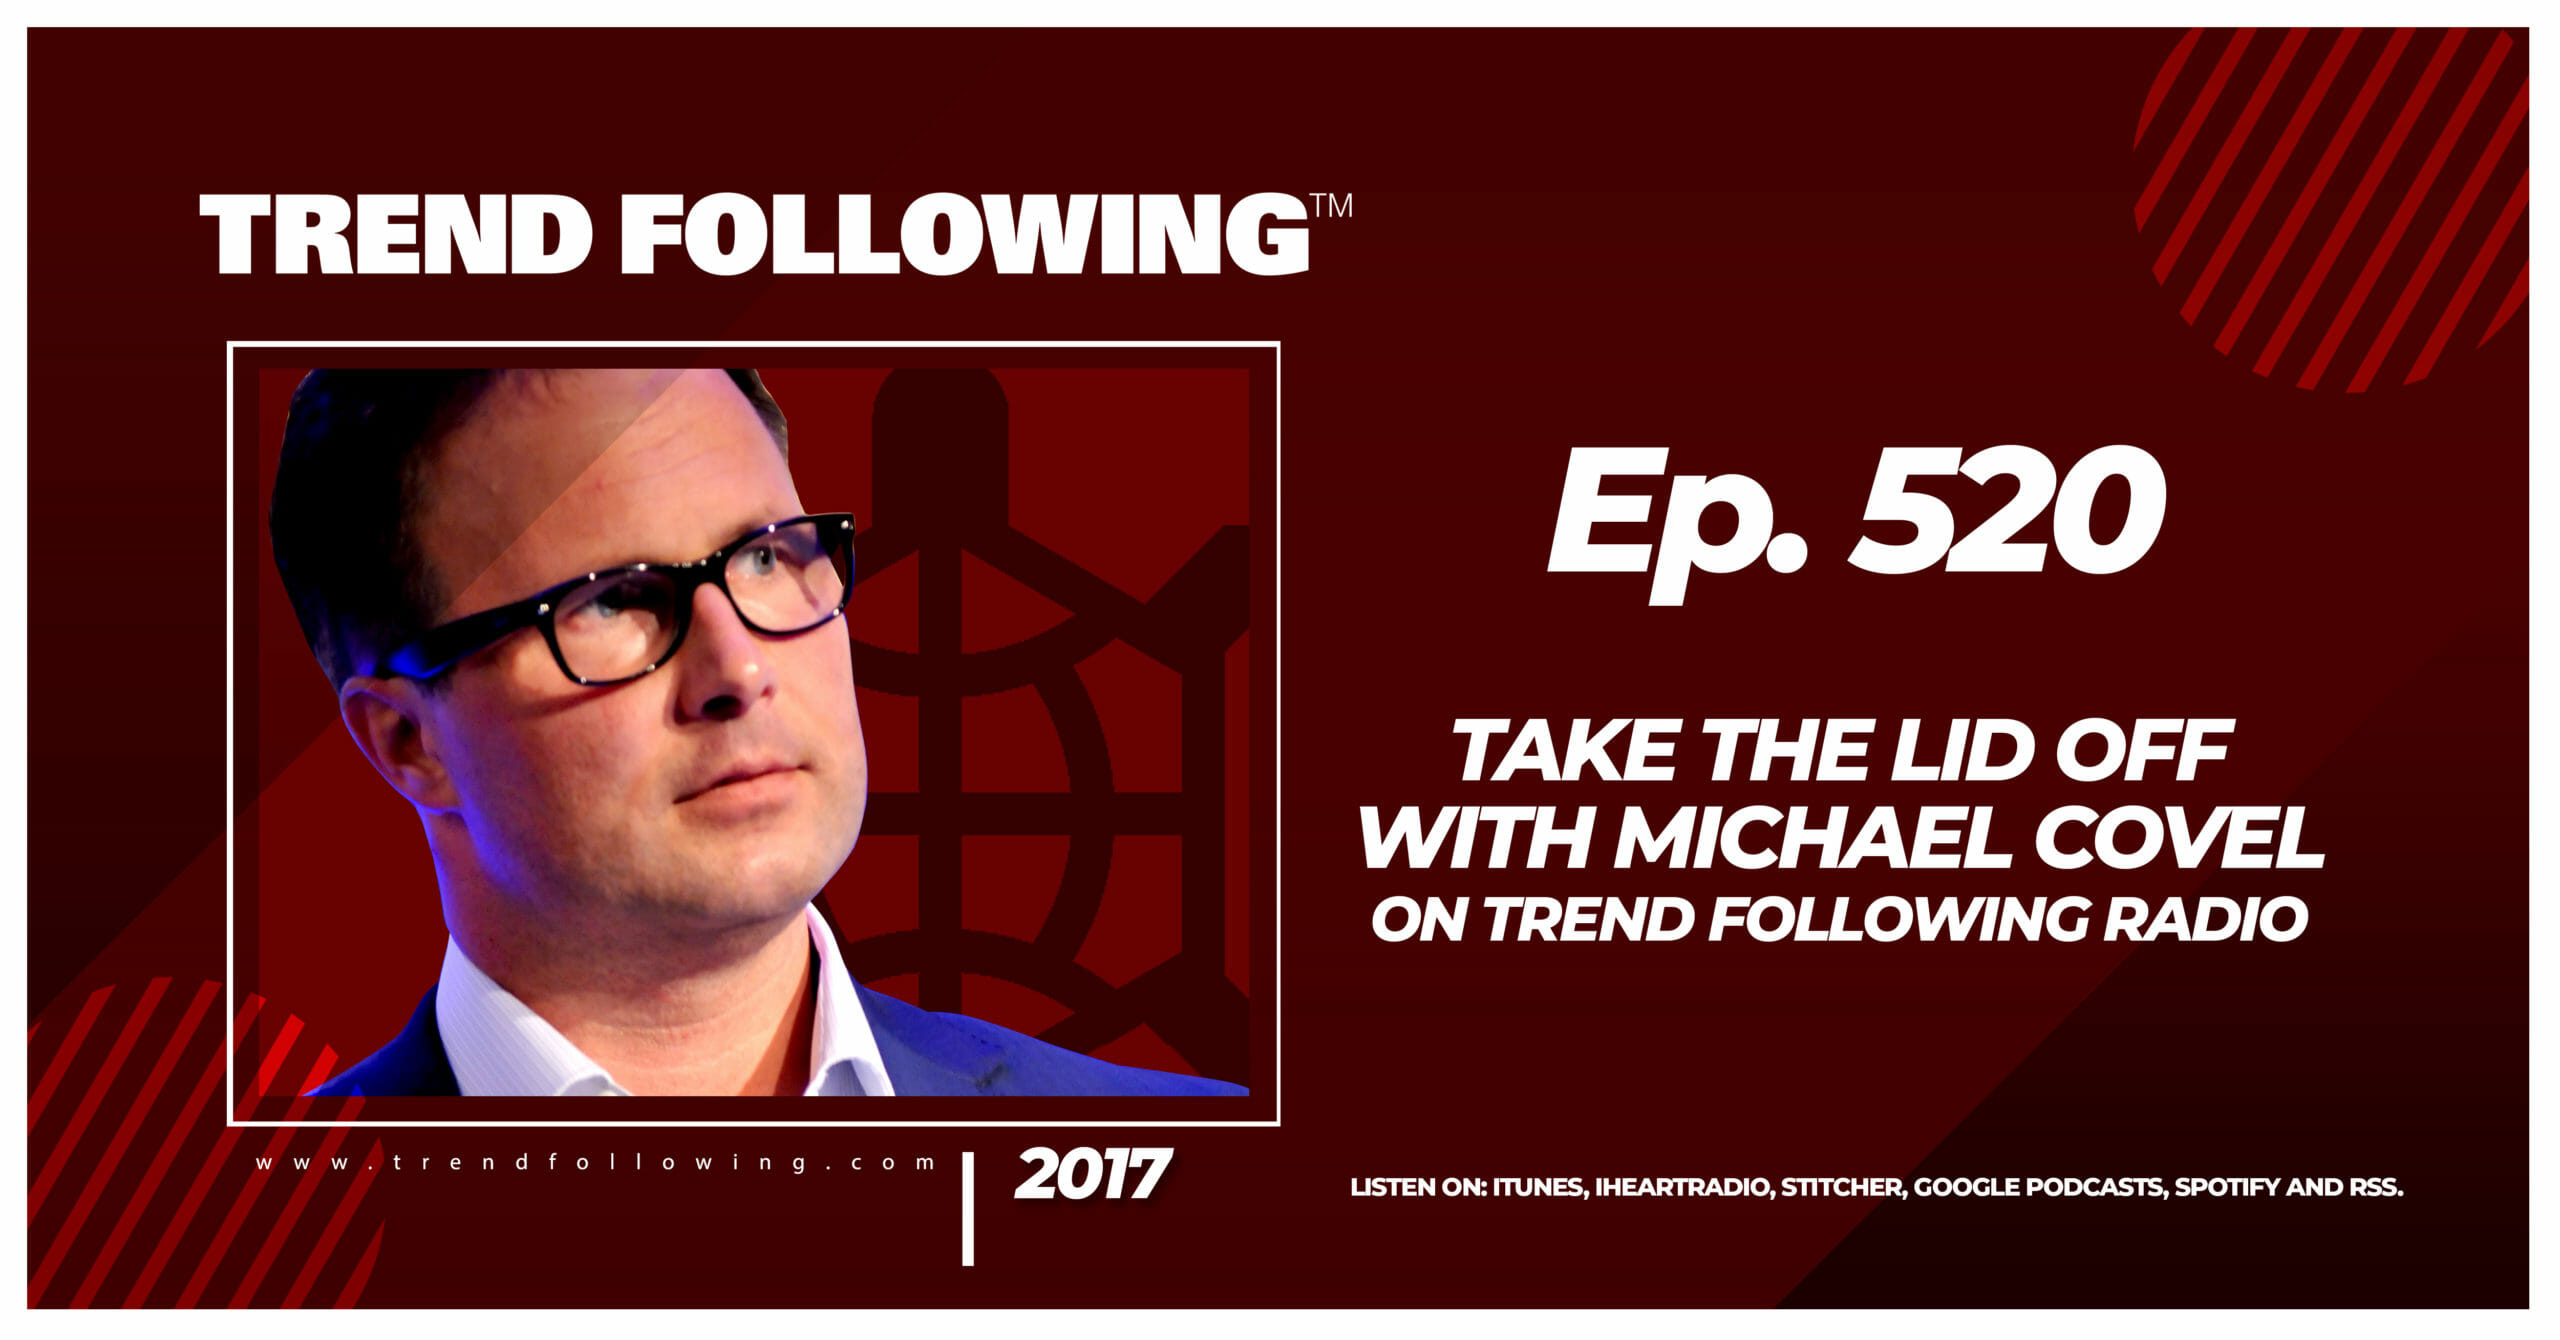 Take the Lid Off with Michael Covel on Trend Following Radio